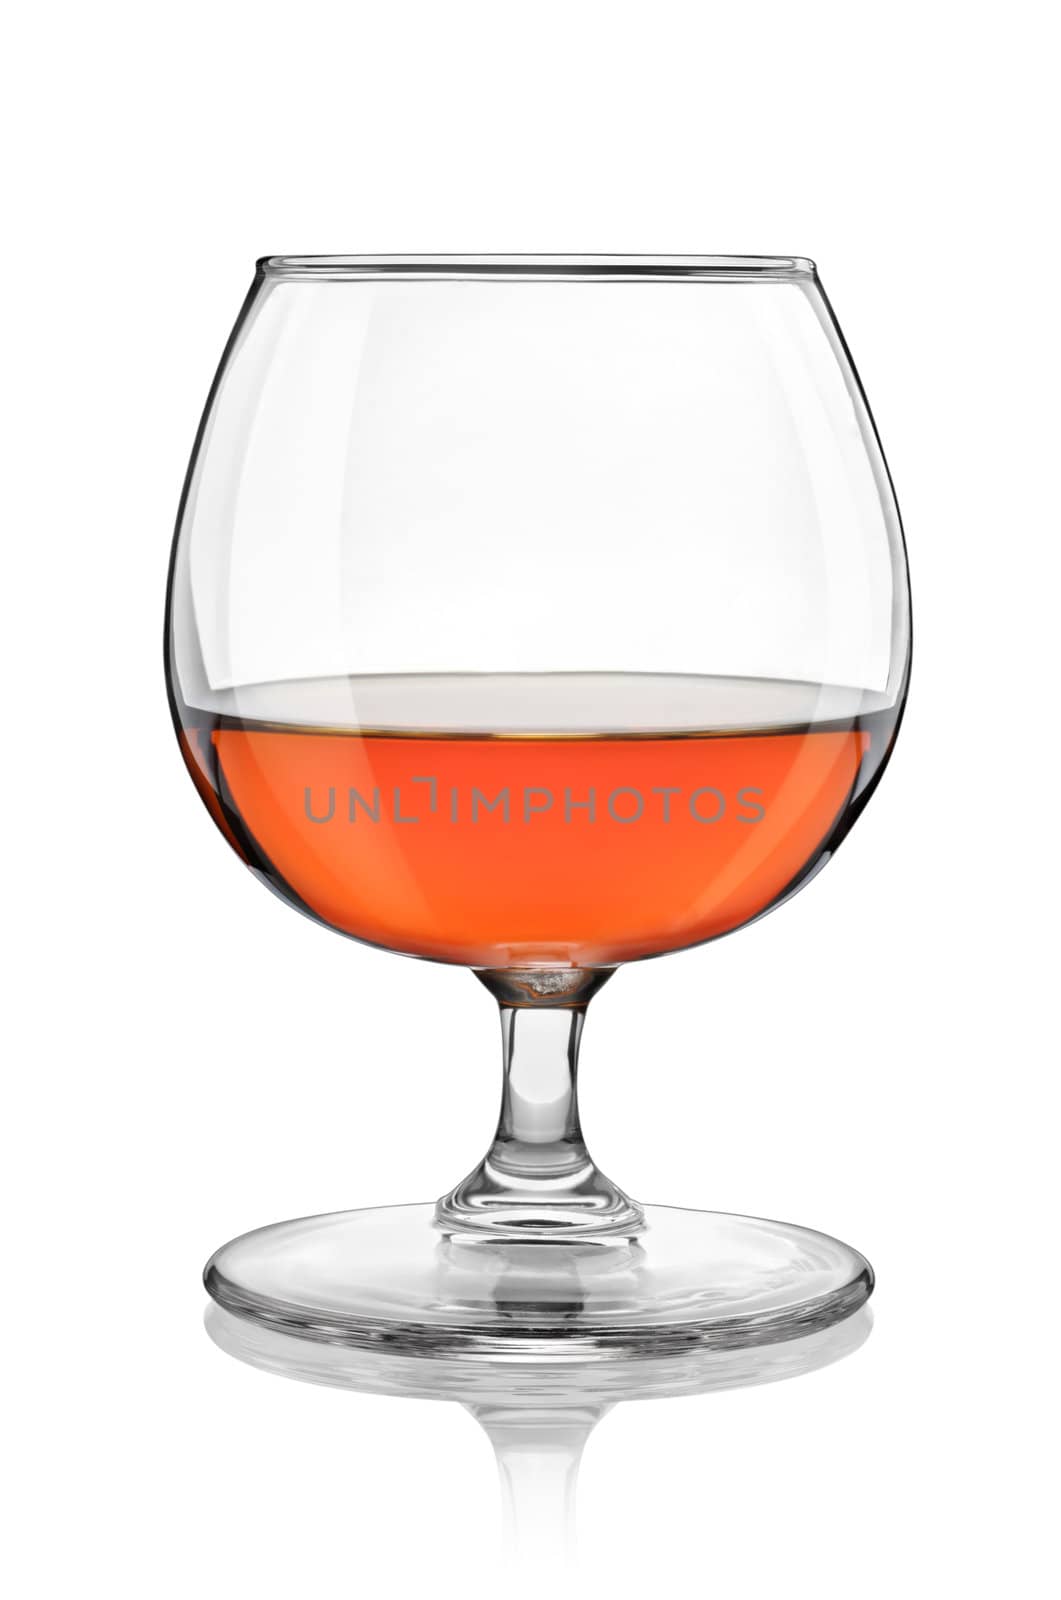 Brandy glass isolated on a white background. Path